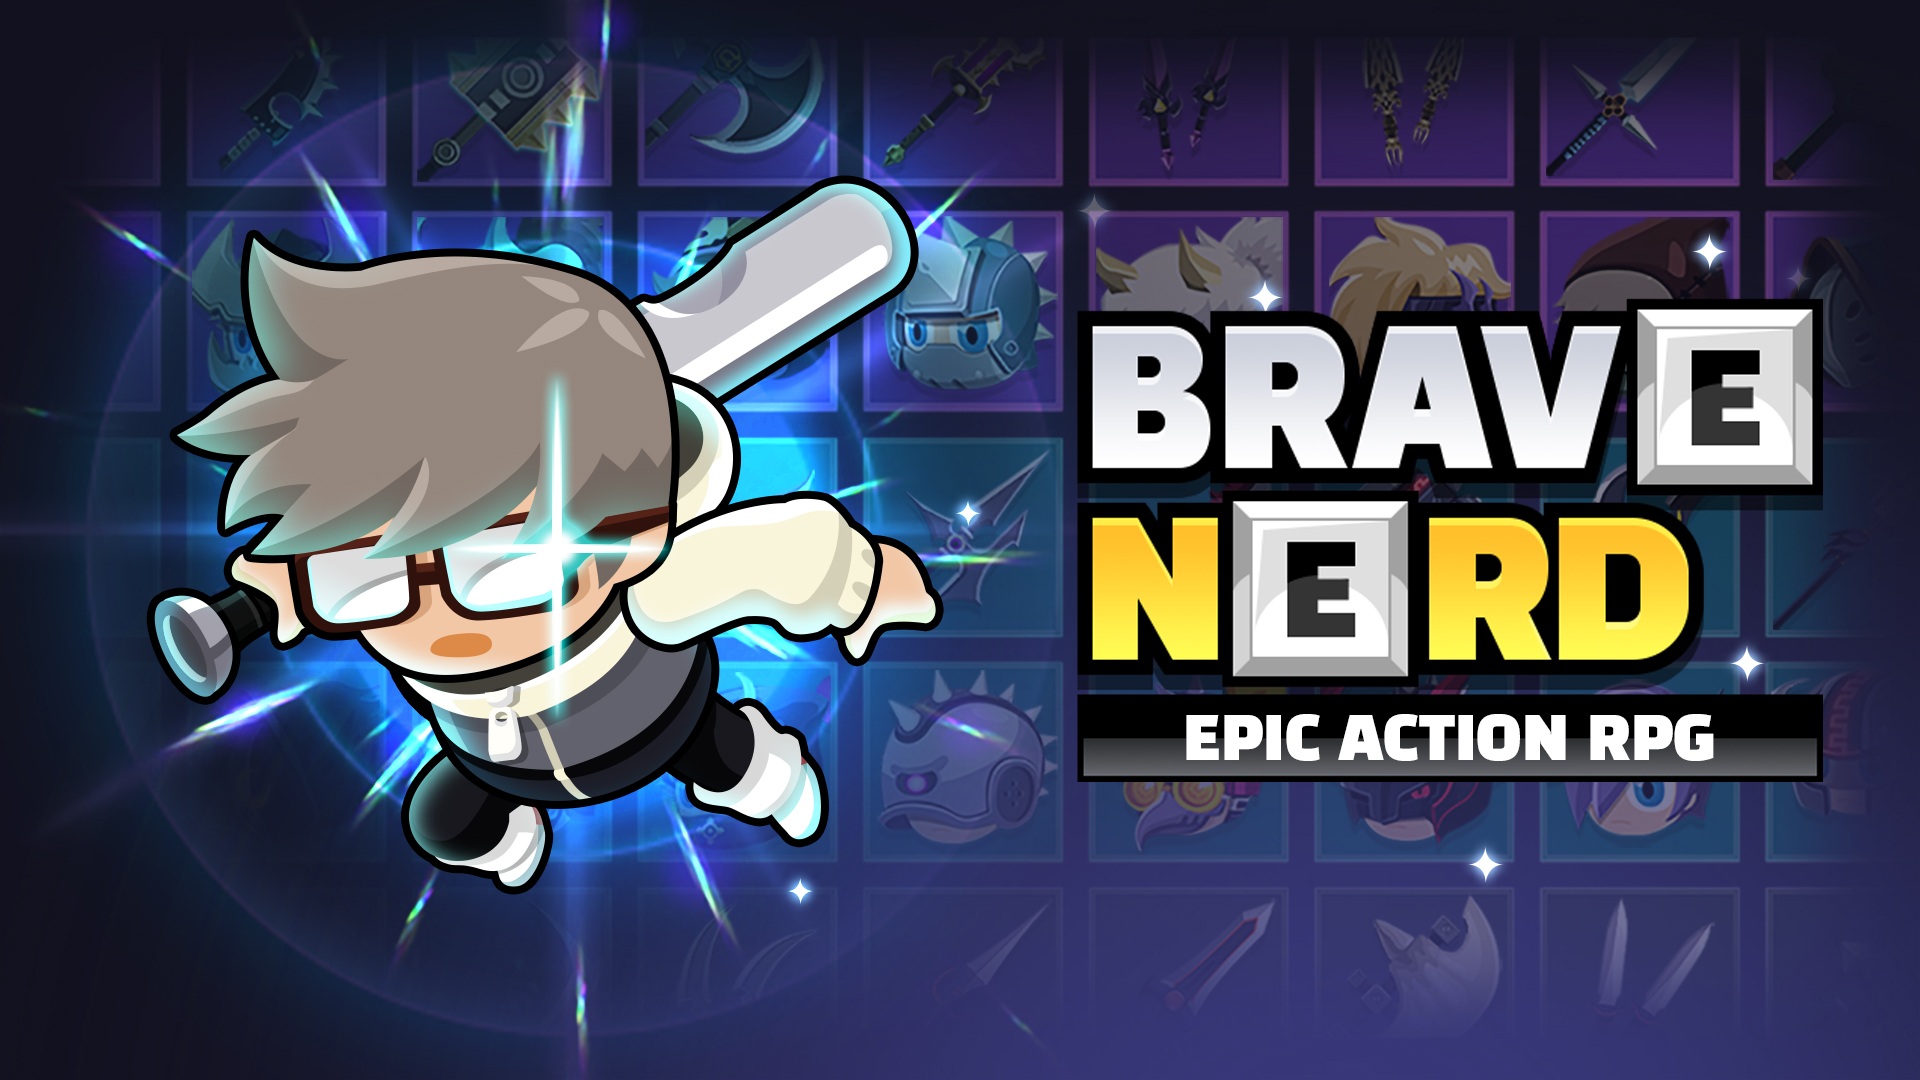 Full version of Android Action game apk The Brave Nerd for tablet and phone.